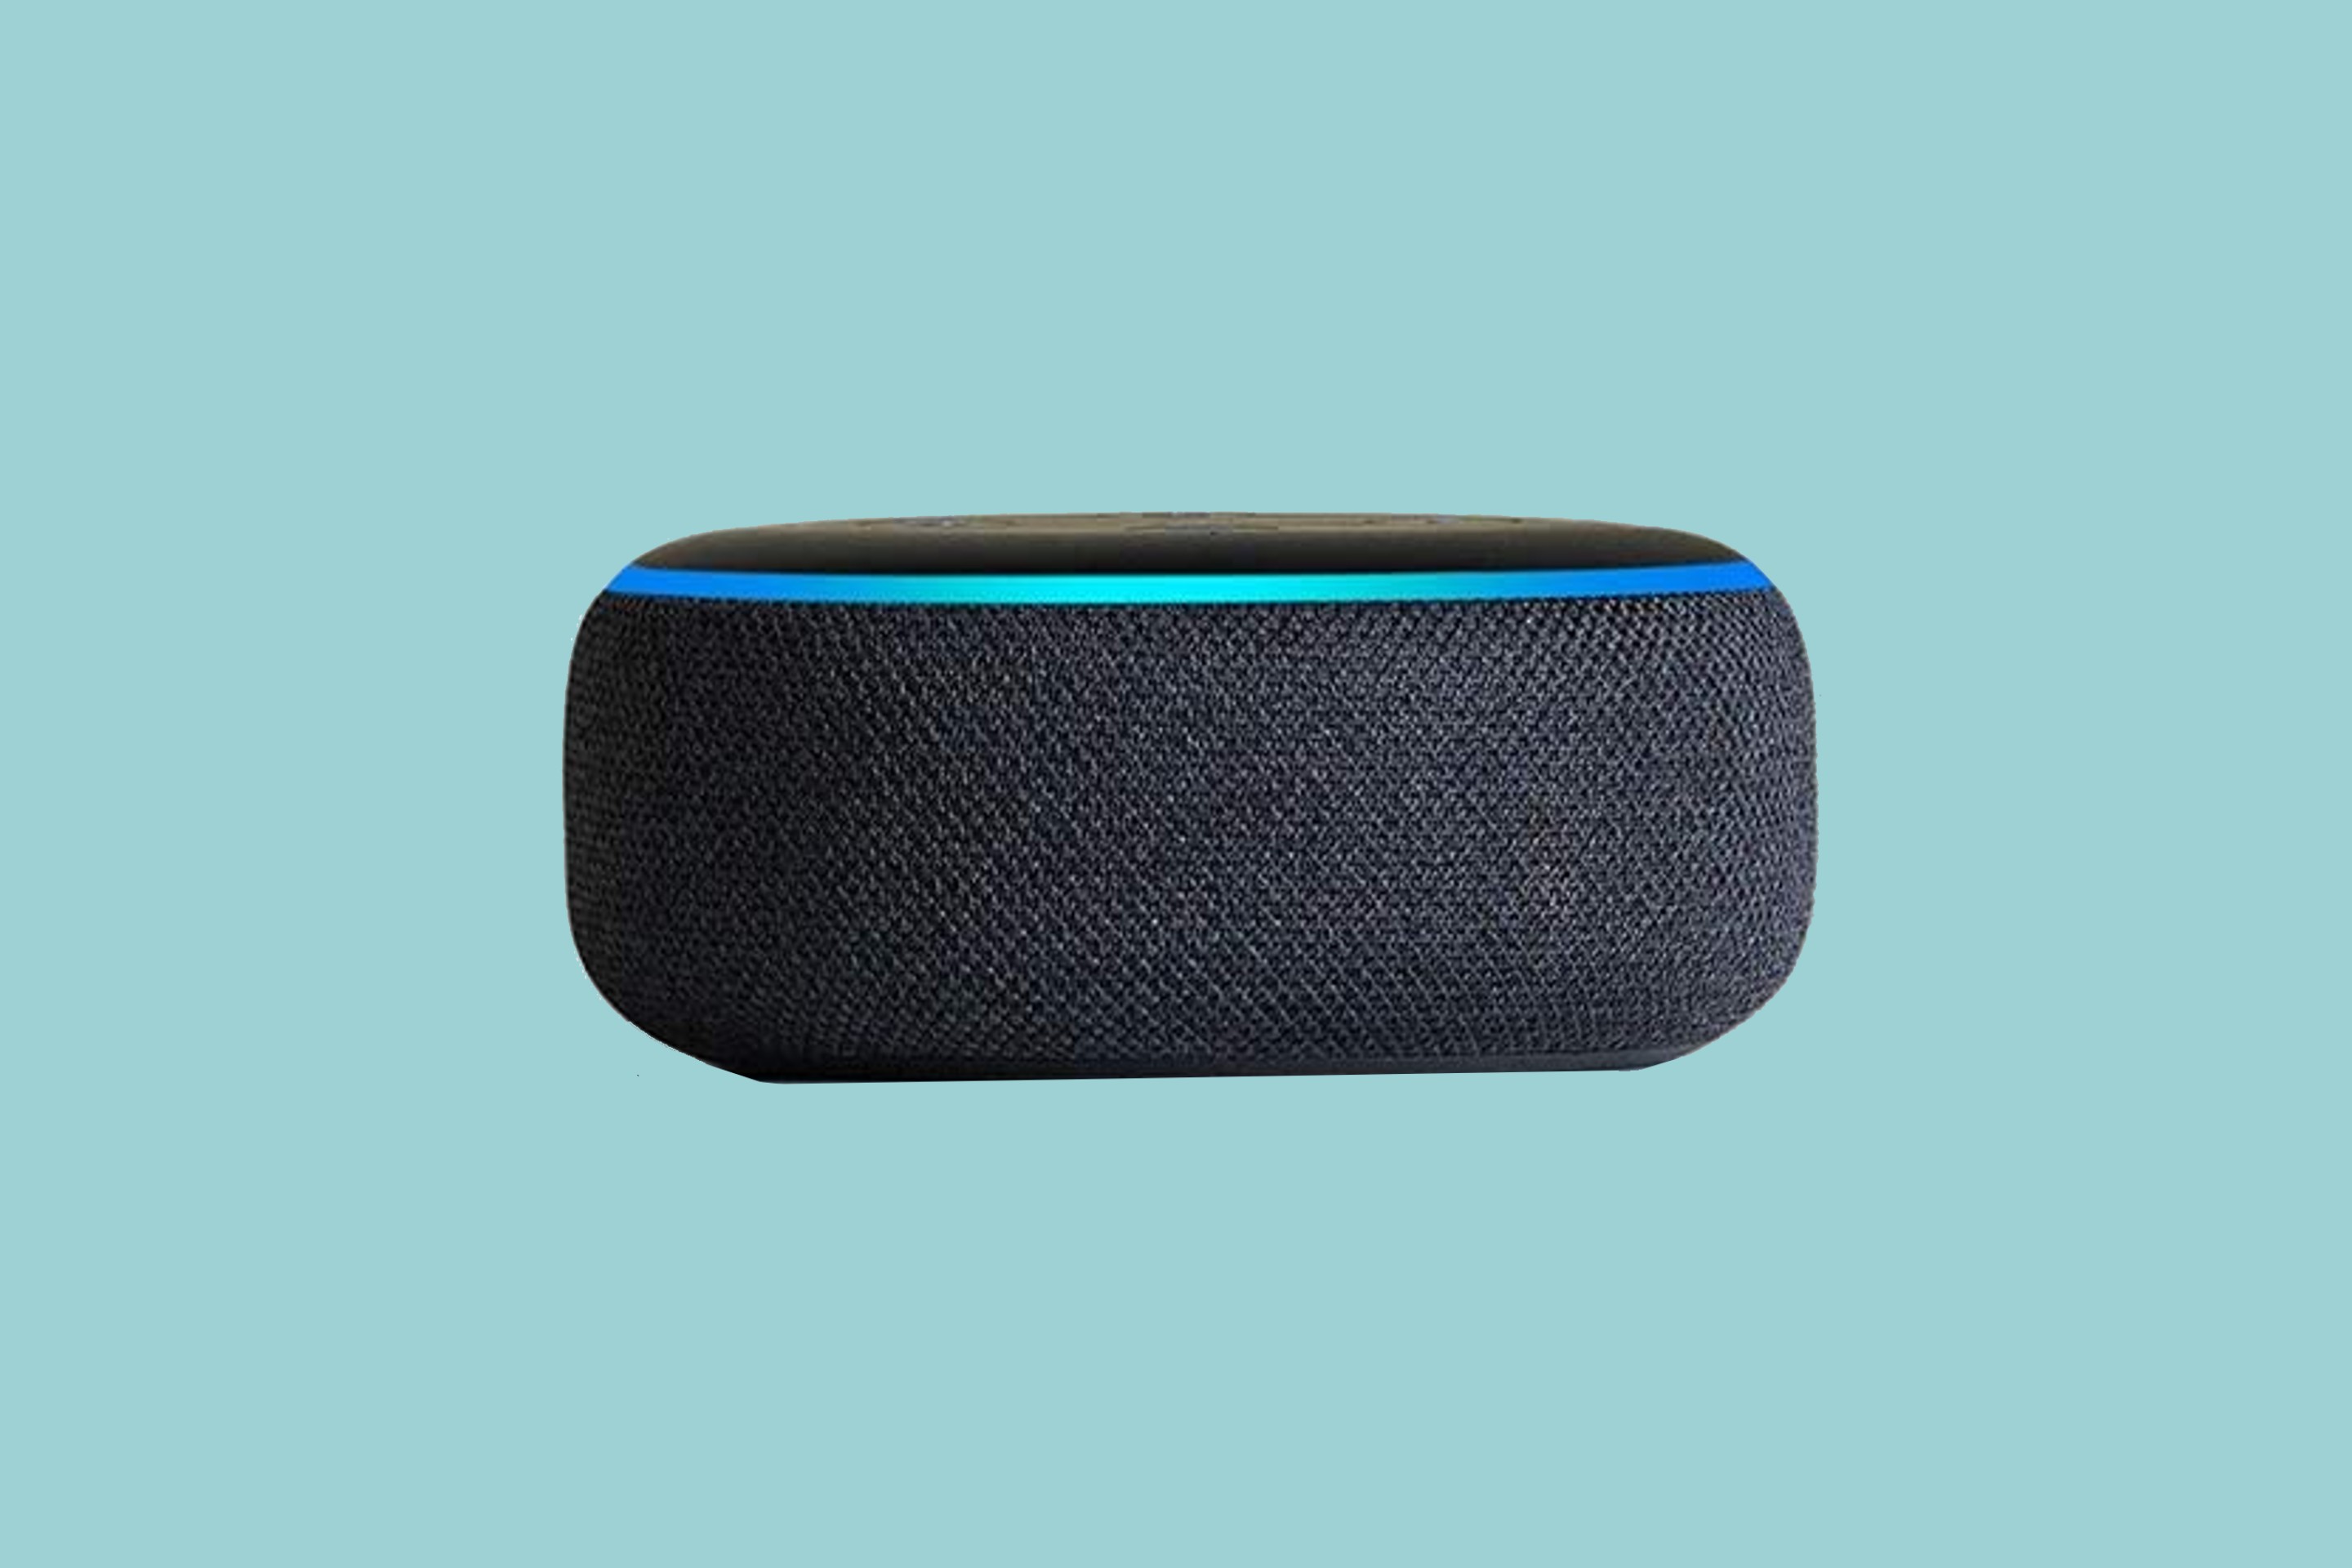 Act Fast! The Ultra-Popular Echo Dot Is 50% Off Today